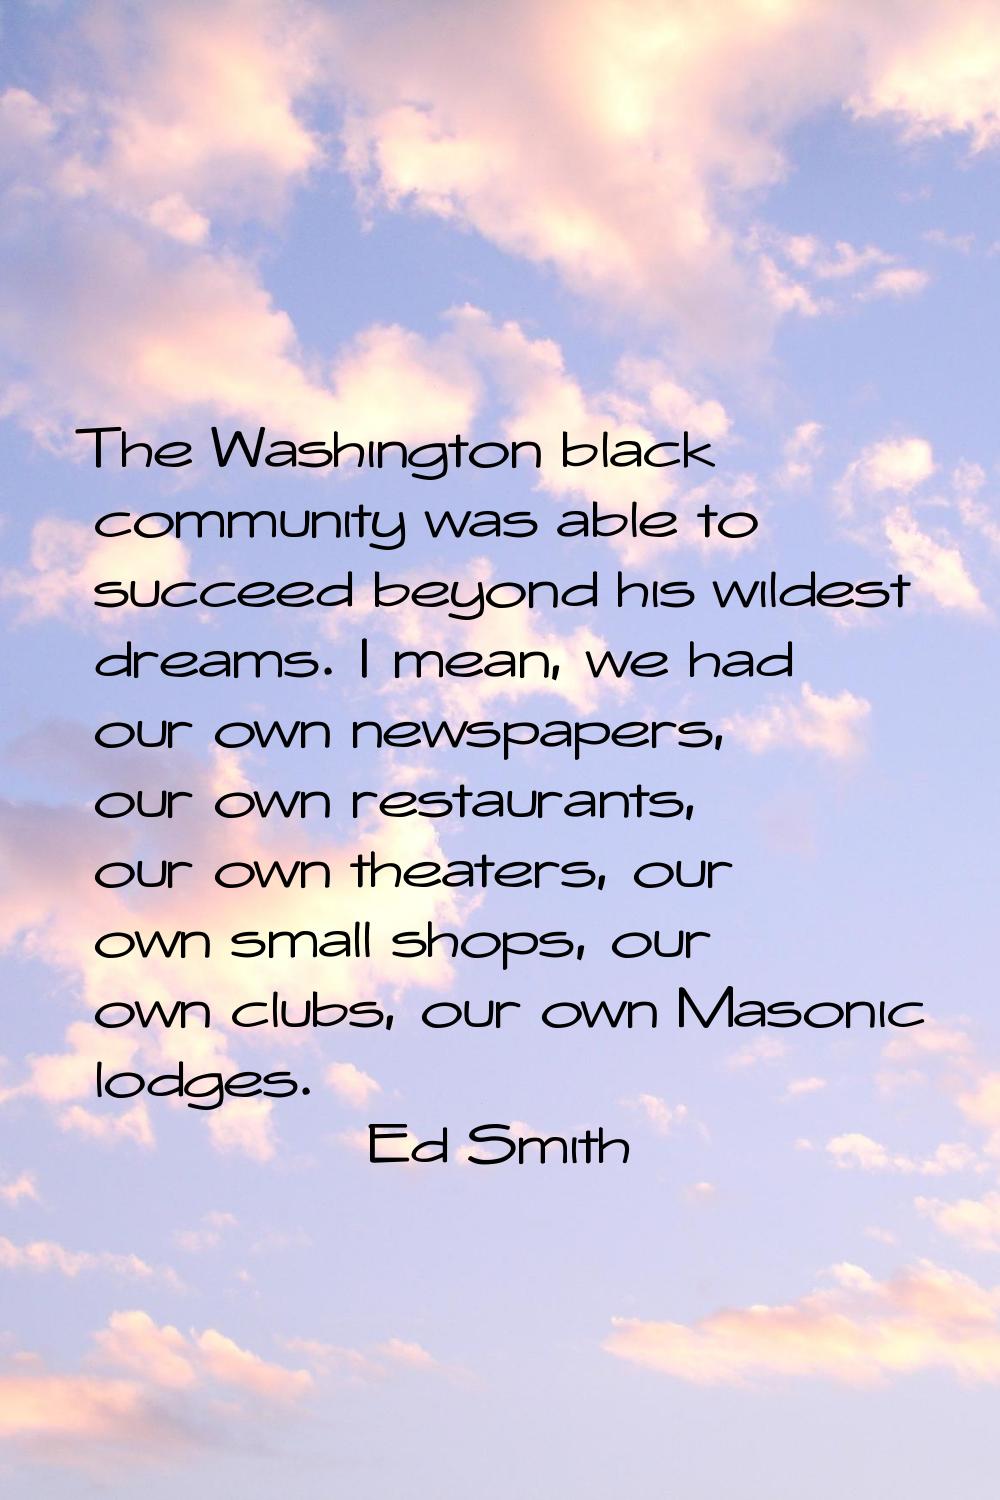 The Washington black community was able to succeed beyond his wildest dreams. I mean, we had our ow